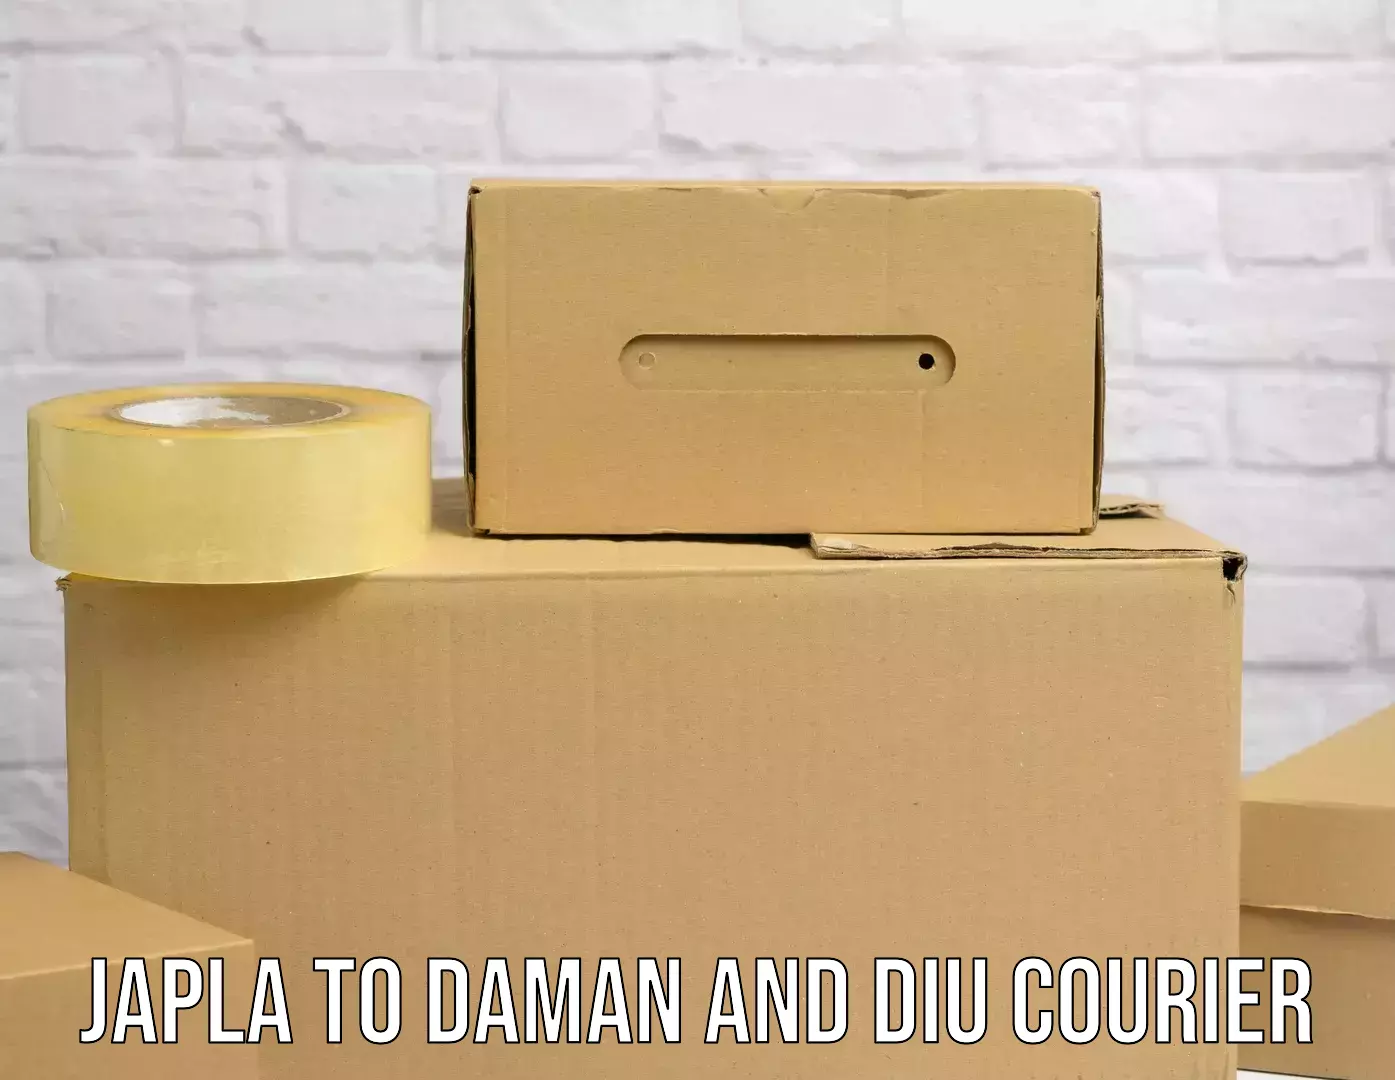 Cost-effective courier options Japla to Daman and Diu